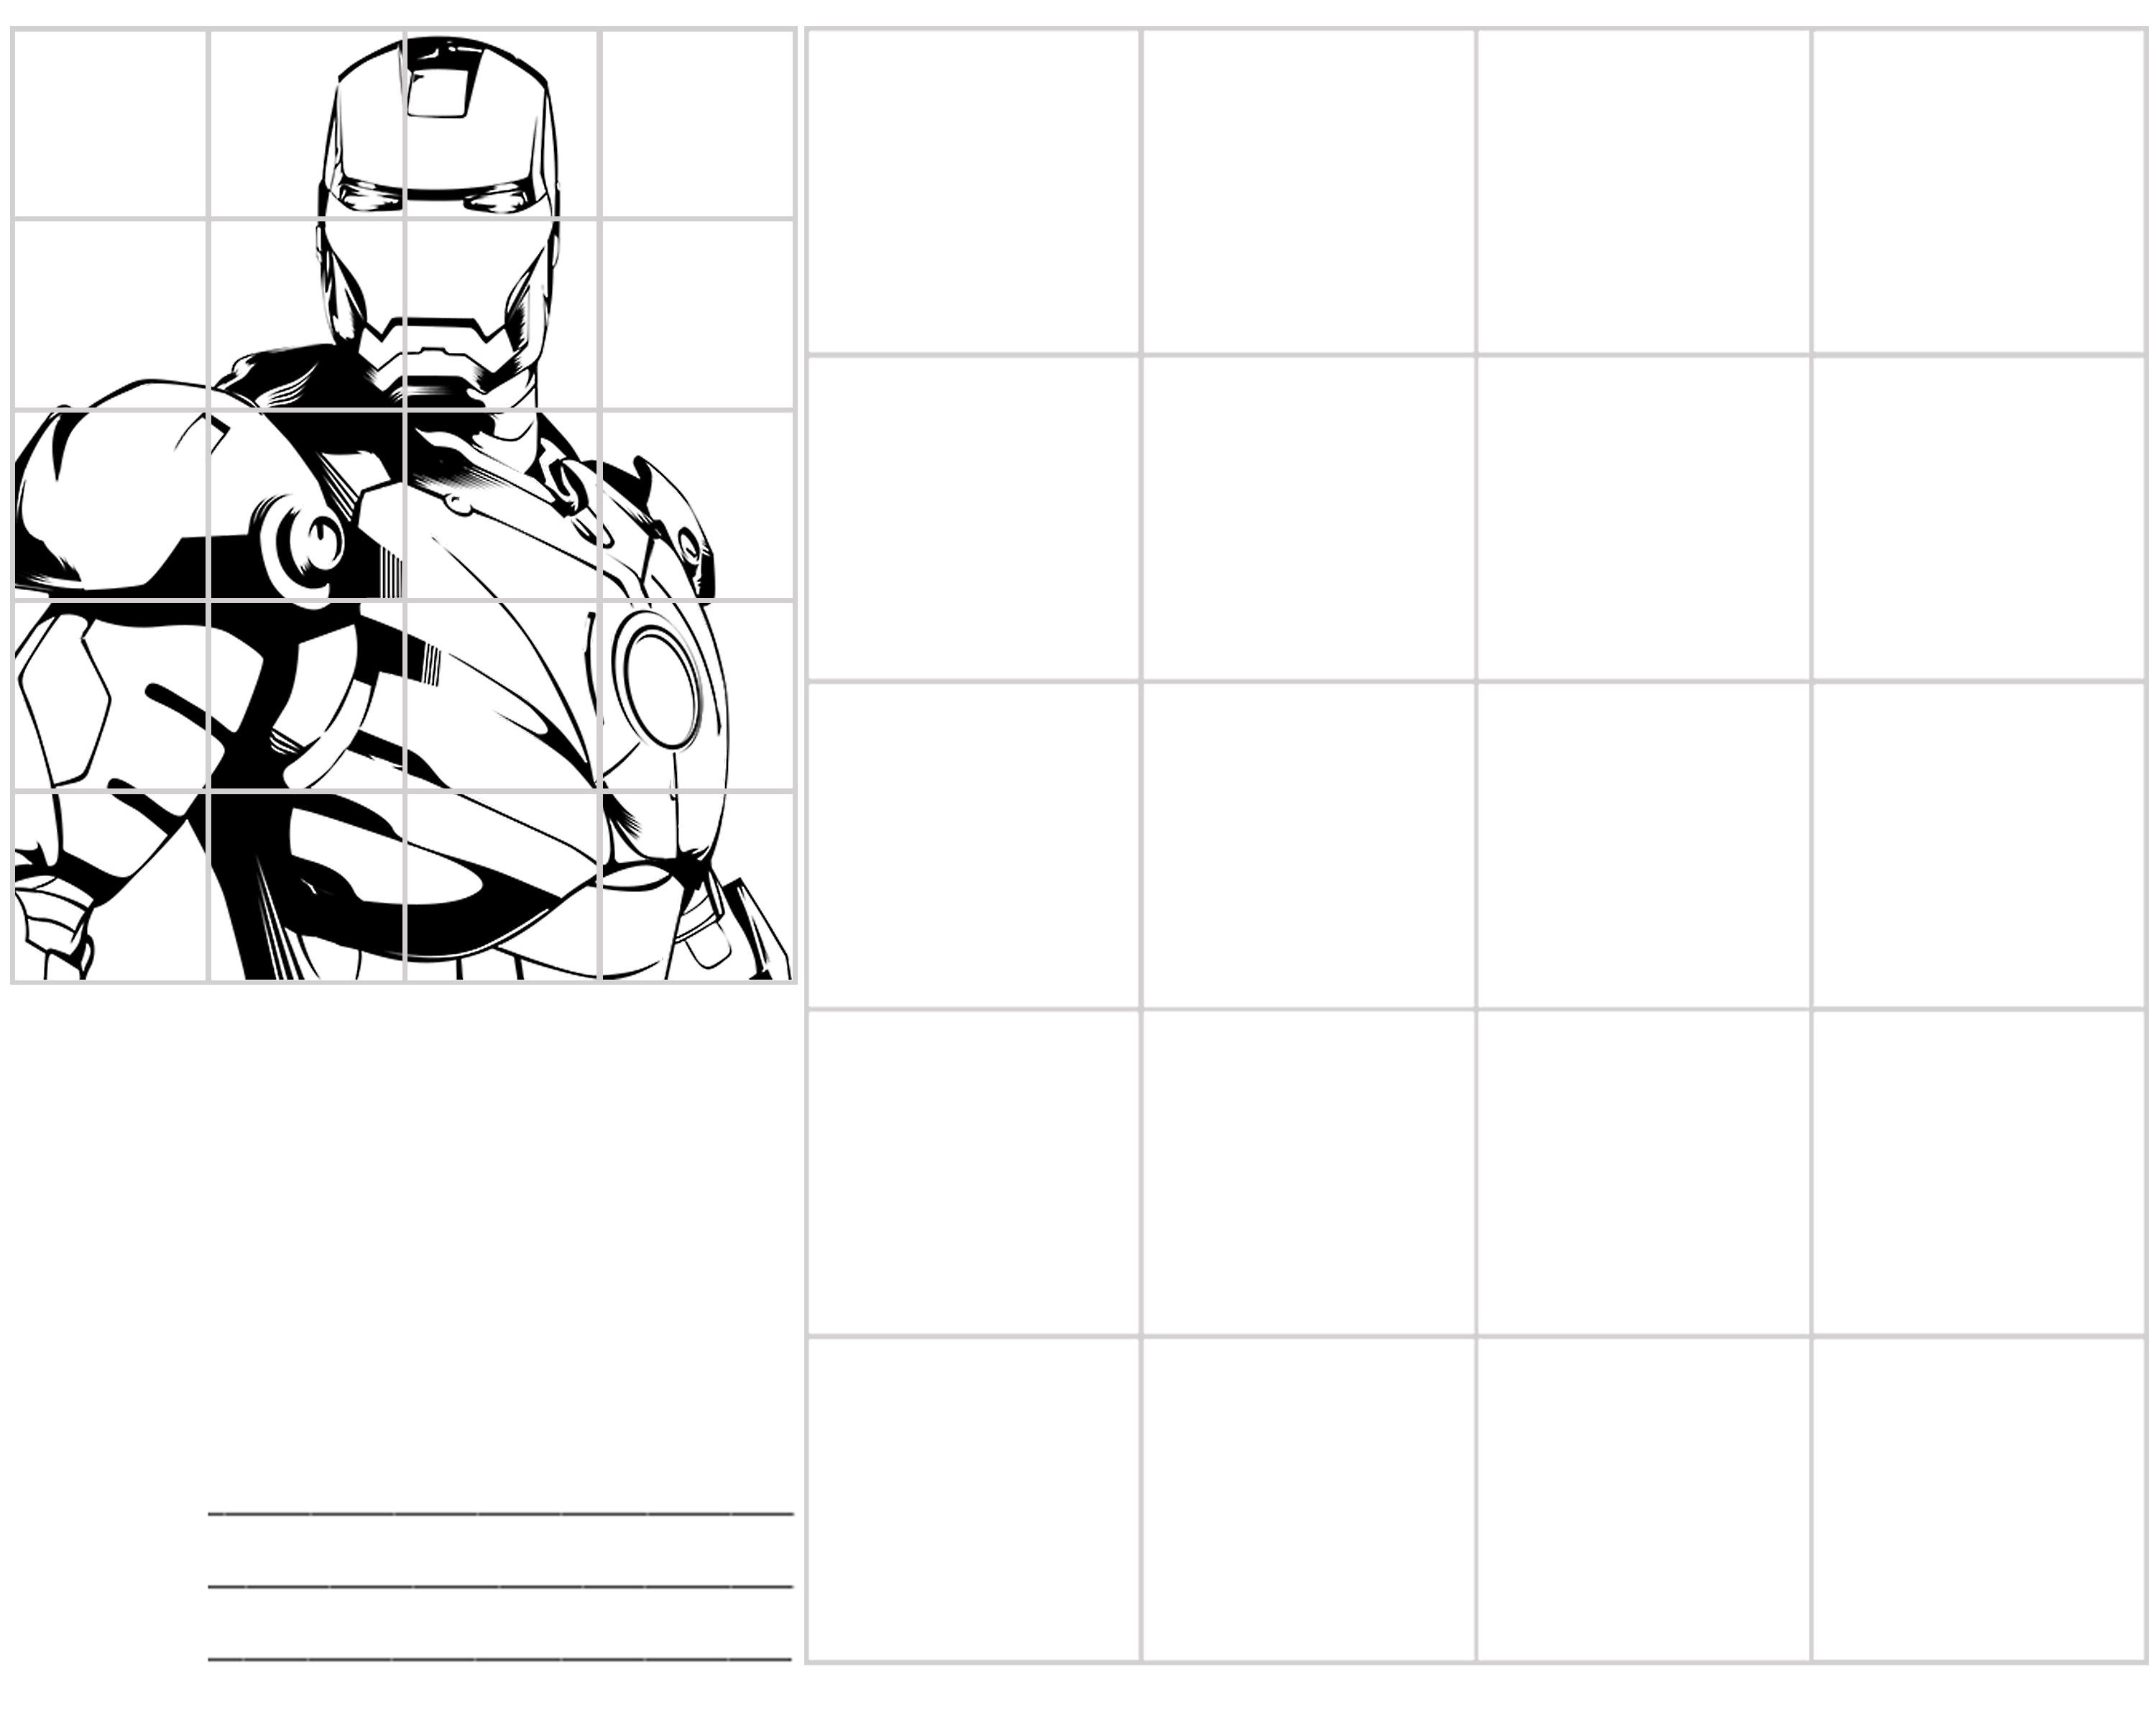 grid-drawing-worksheets-online-free-download-goodimg-co